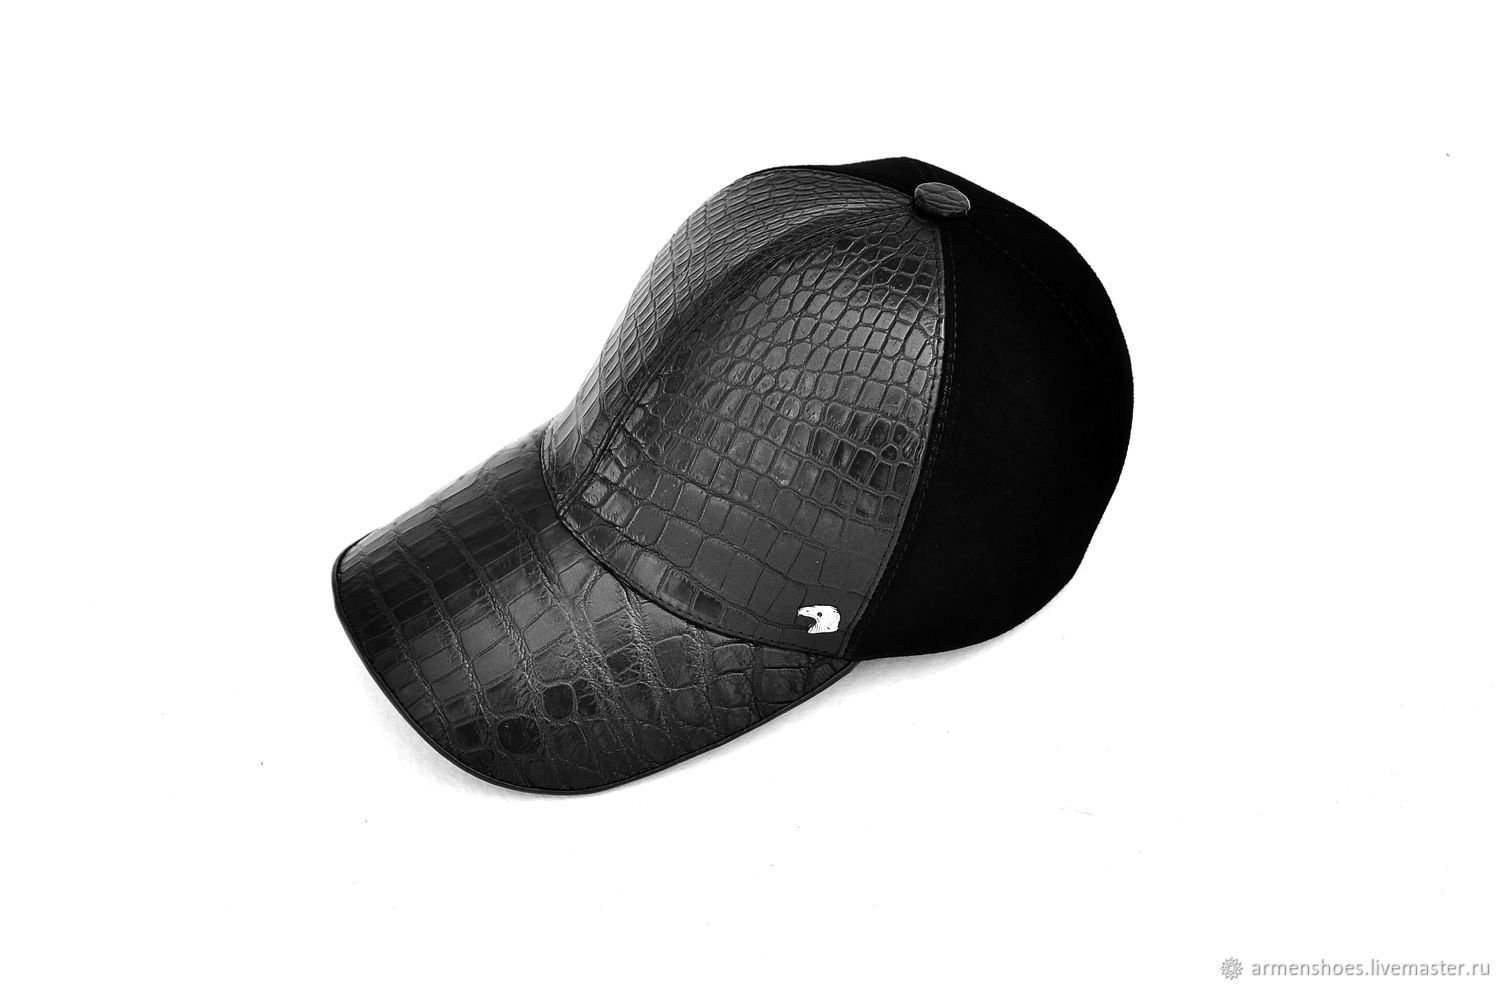 Baseball cap made of crocodile leather and natural suede, to order!, Baseball caps, St. Petersburg,  Фото №1